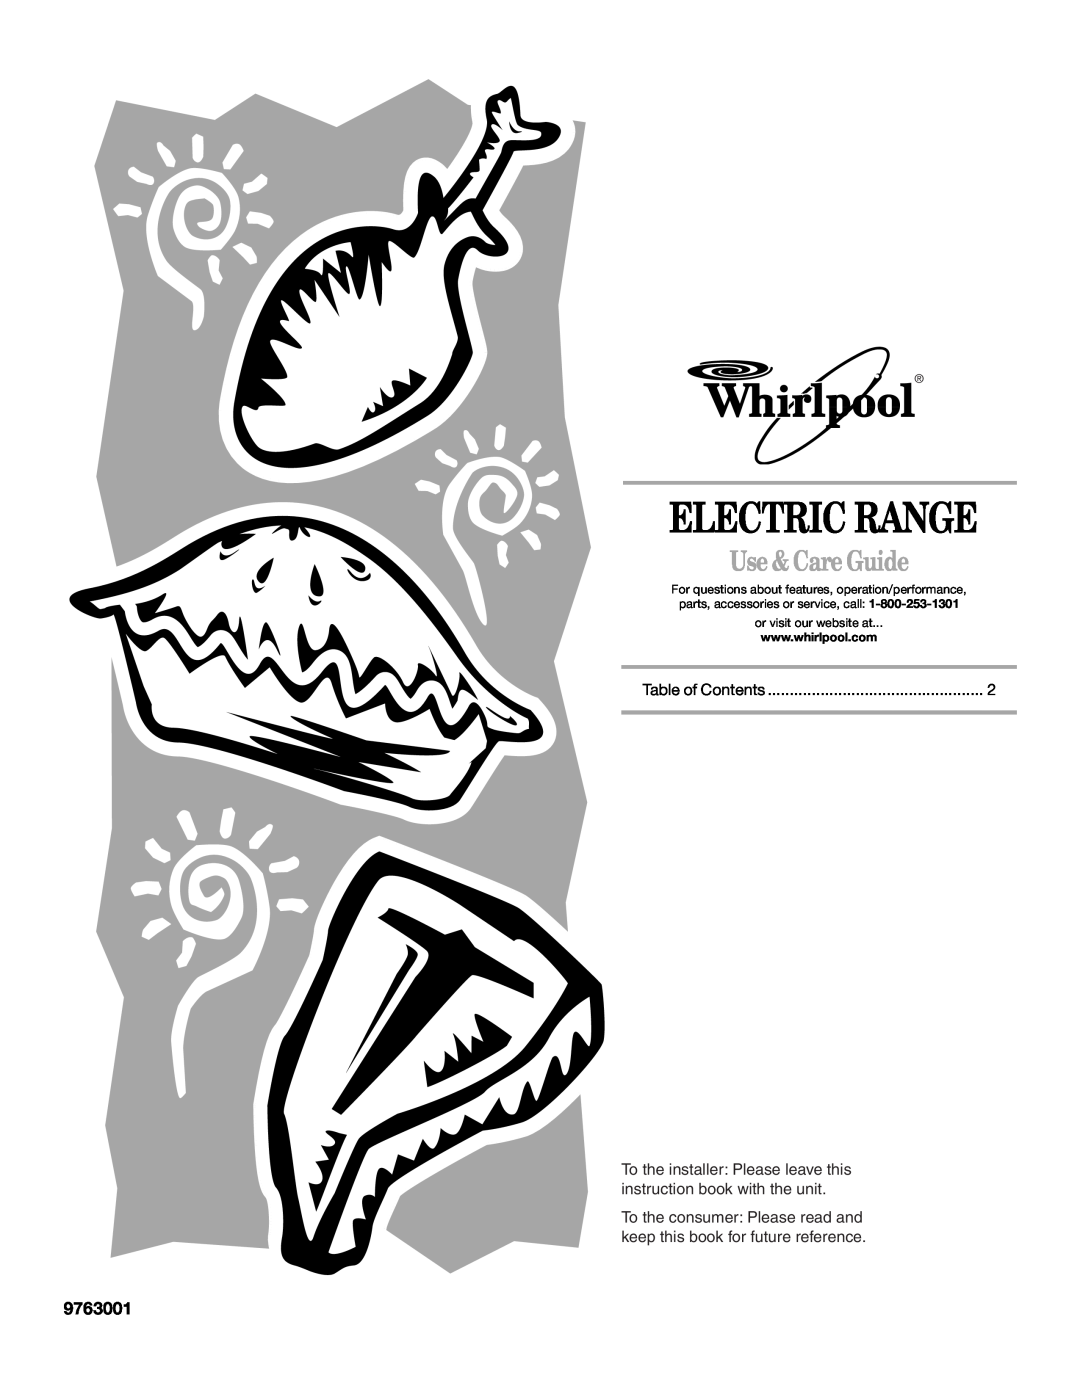 Whirlpool 9763001 manual Electric Range, Use & Care Guide, or visit our website at 